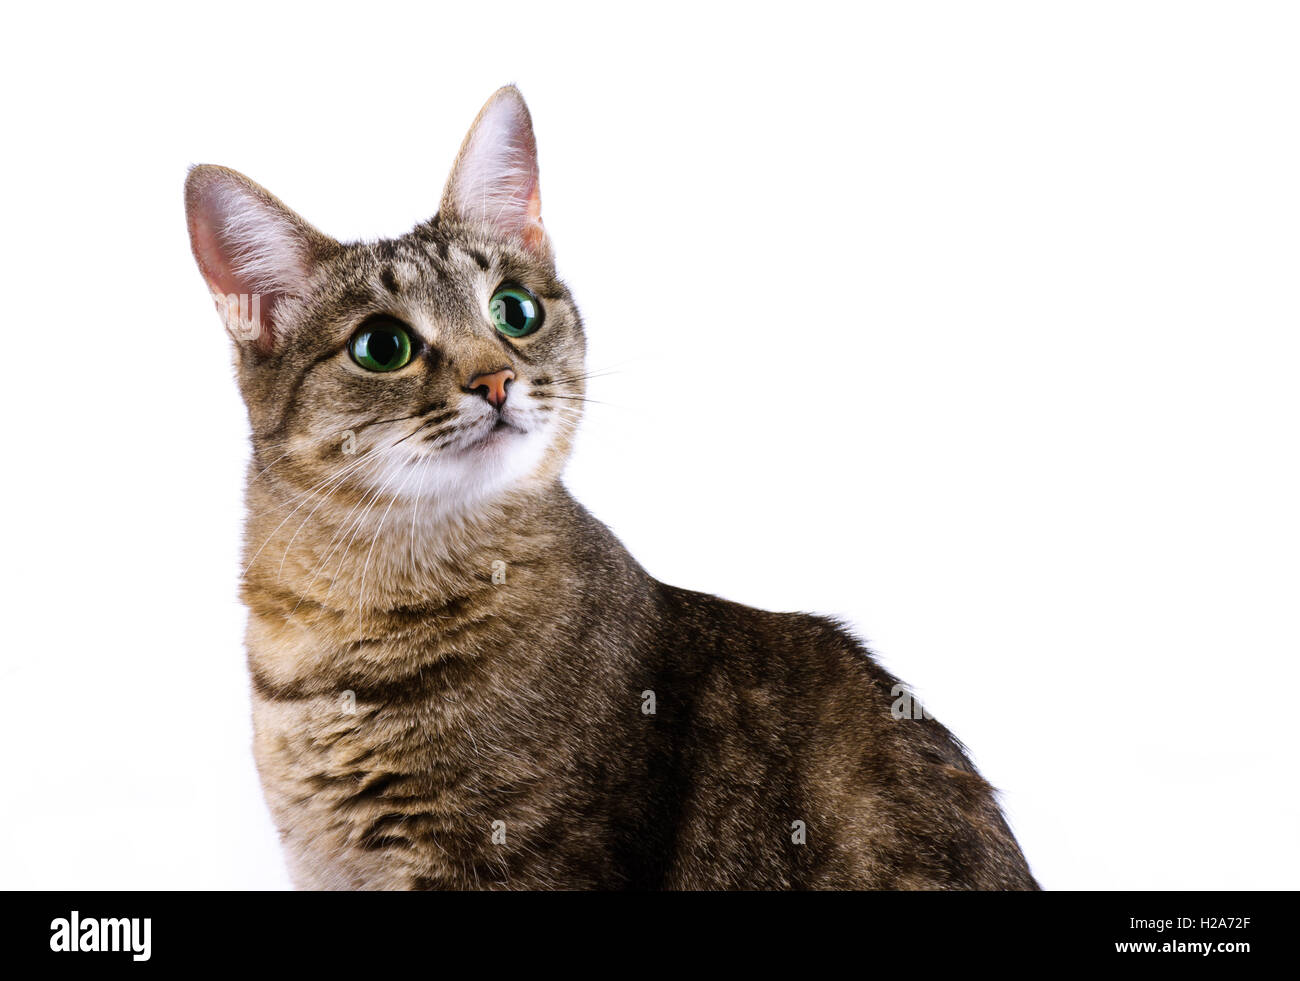 Tabby cat with green eyes isolated over white background Stock Photo